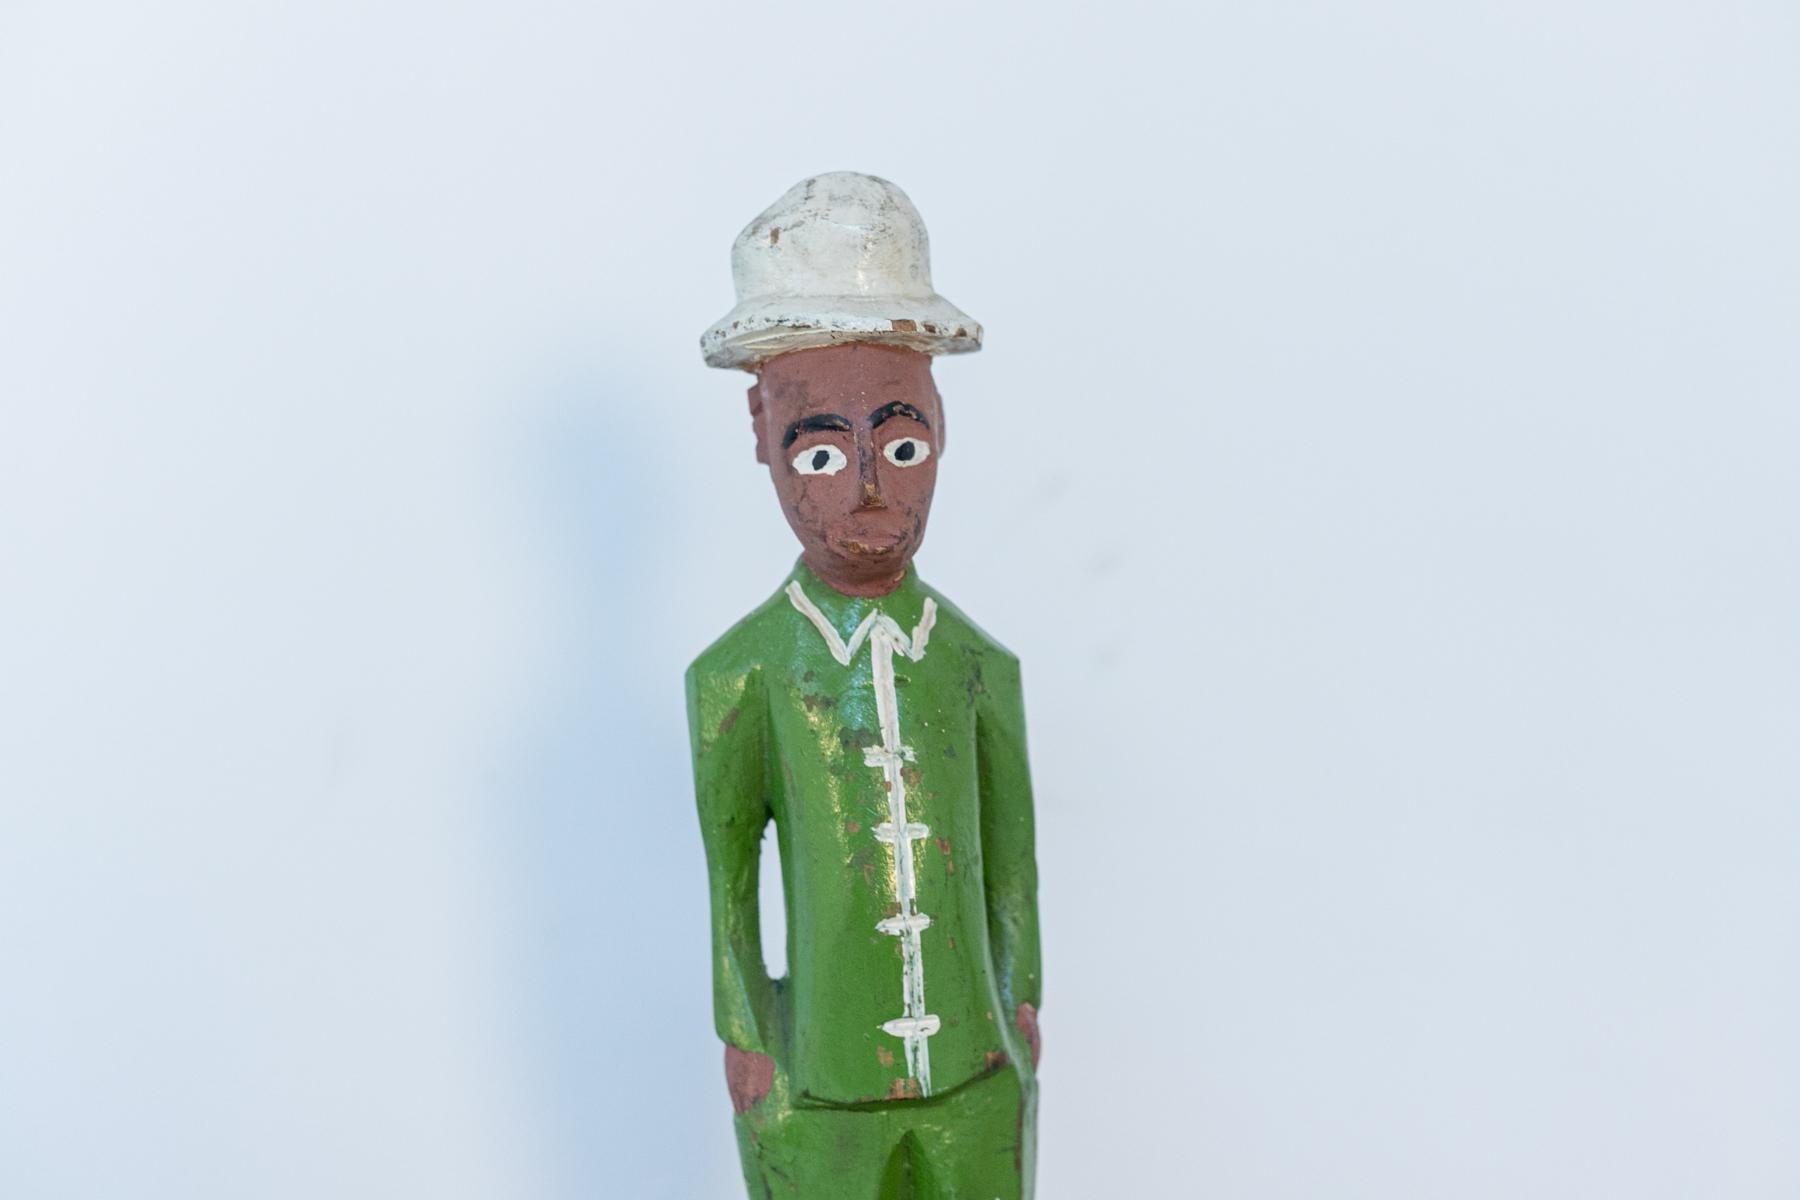 Beautiful painted wood statue from the 50's, belonging to African art.
The statue of a man African art is made entirely of painted wood, depicts a man with his hands in his pockets.
The man is wearing a shiny green jacket, has his hands in his